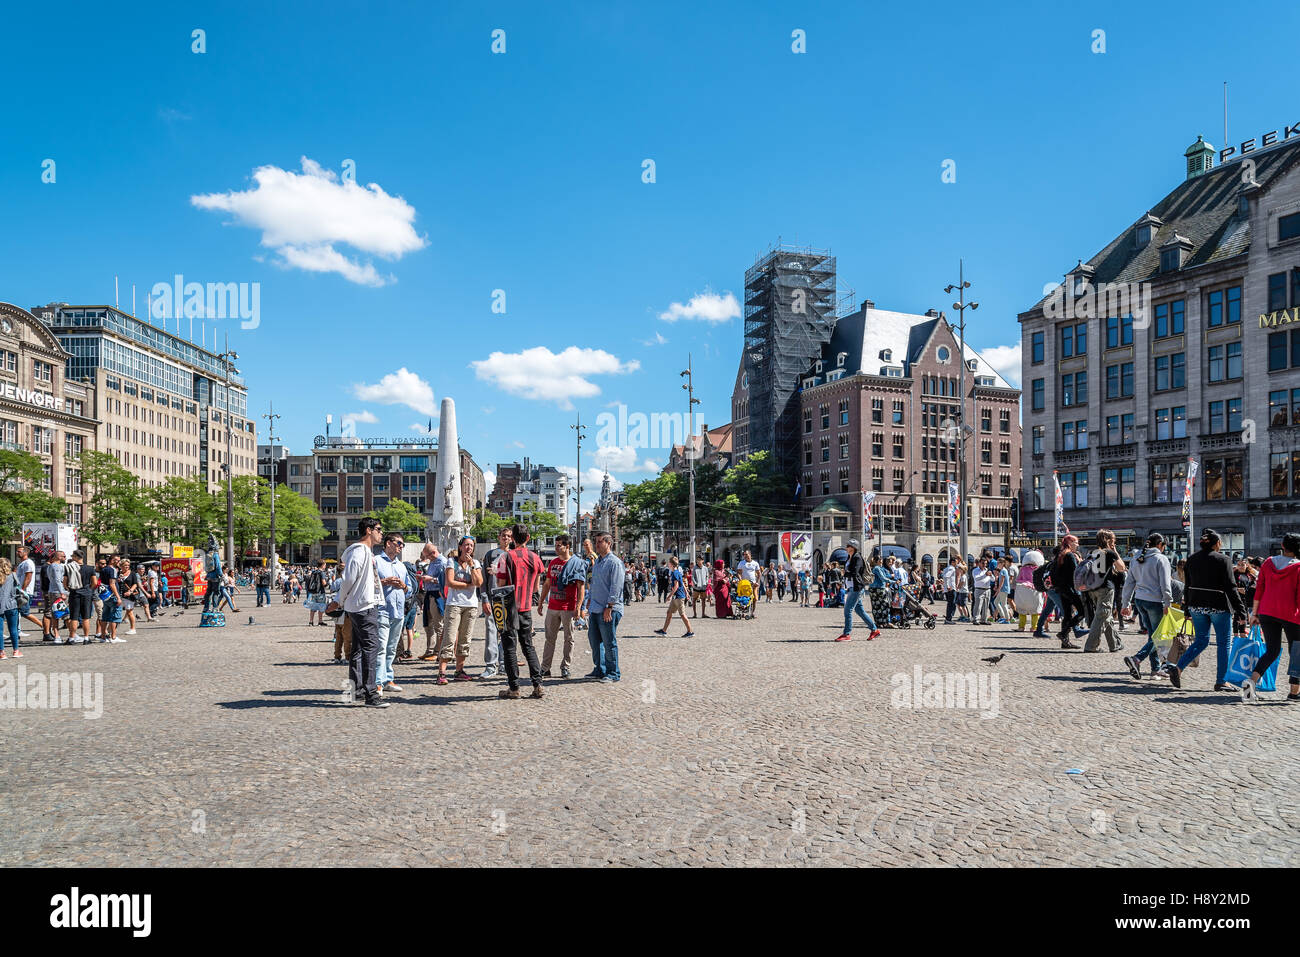 Amsterdam, Netherlands - August 1, 2016: Dam Square is a town square in Amsterdam. Its notable buildings and frequent events make it one of the most w Stock Photo